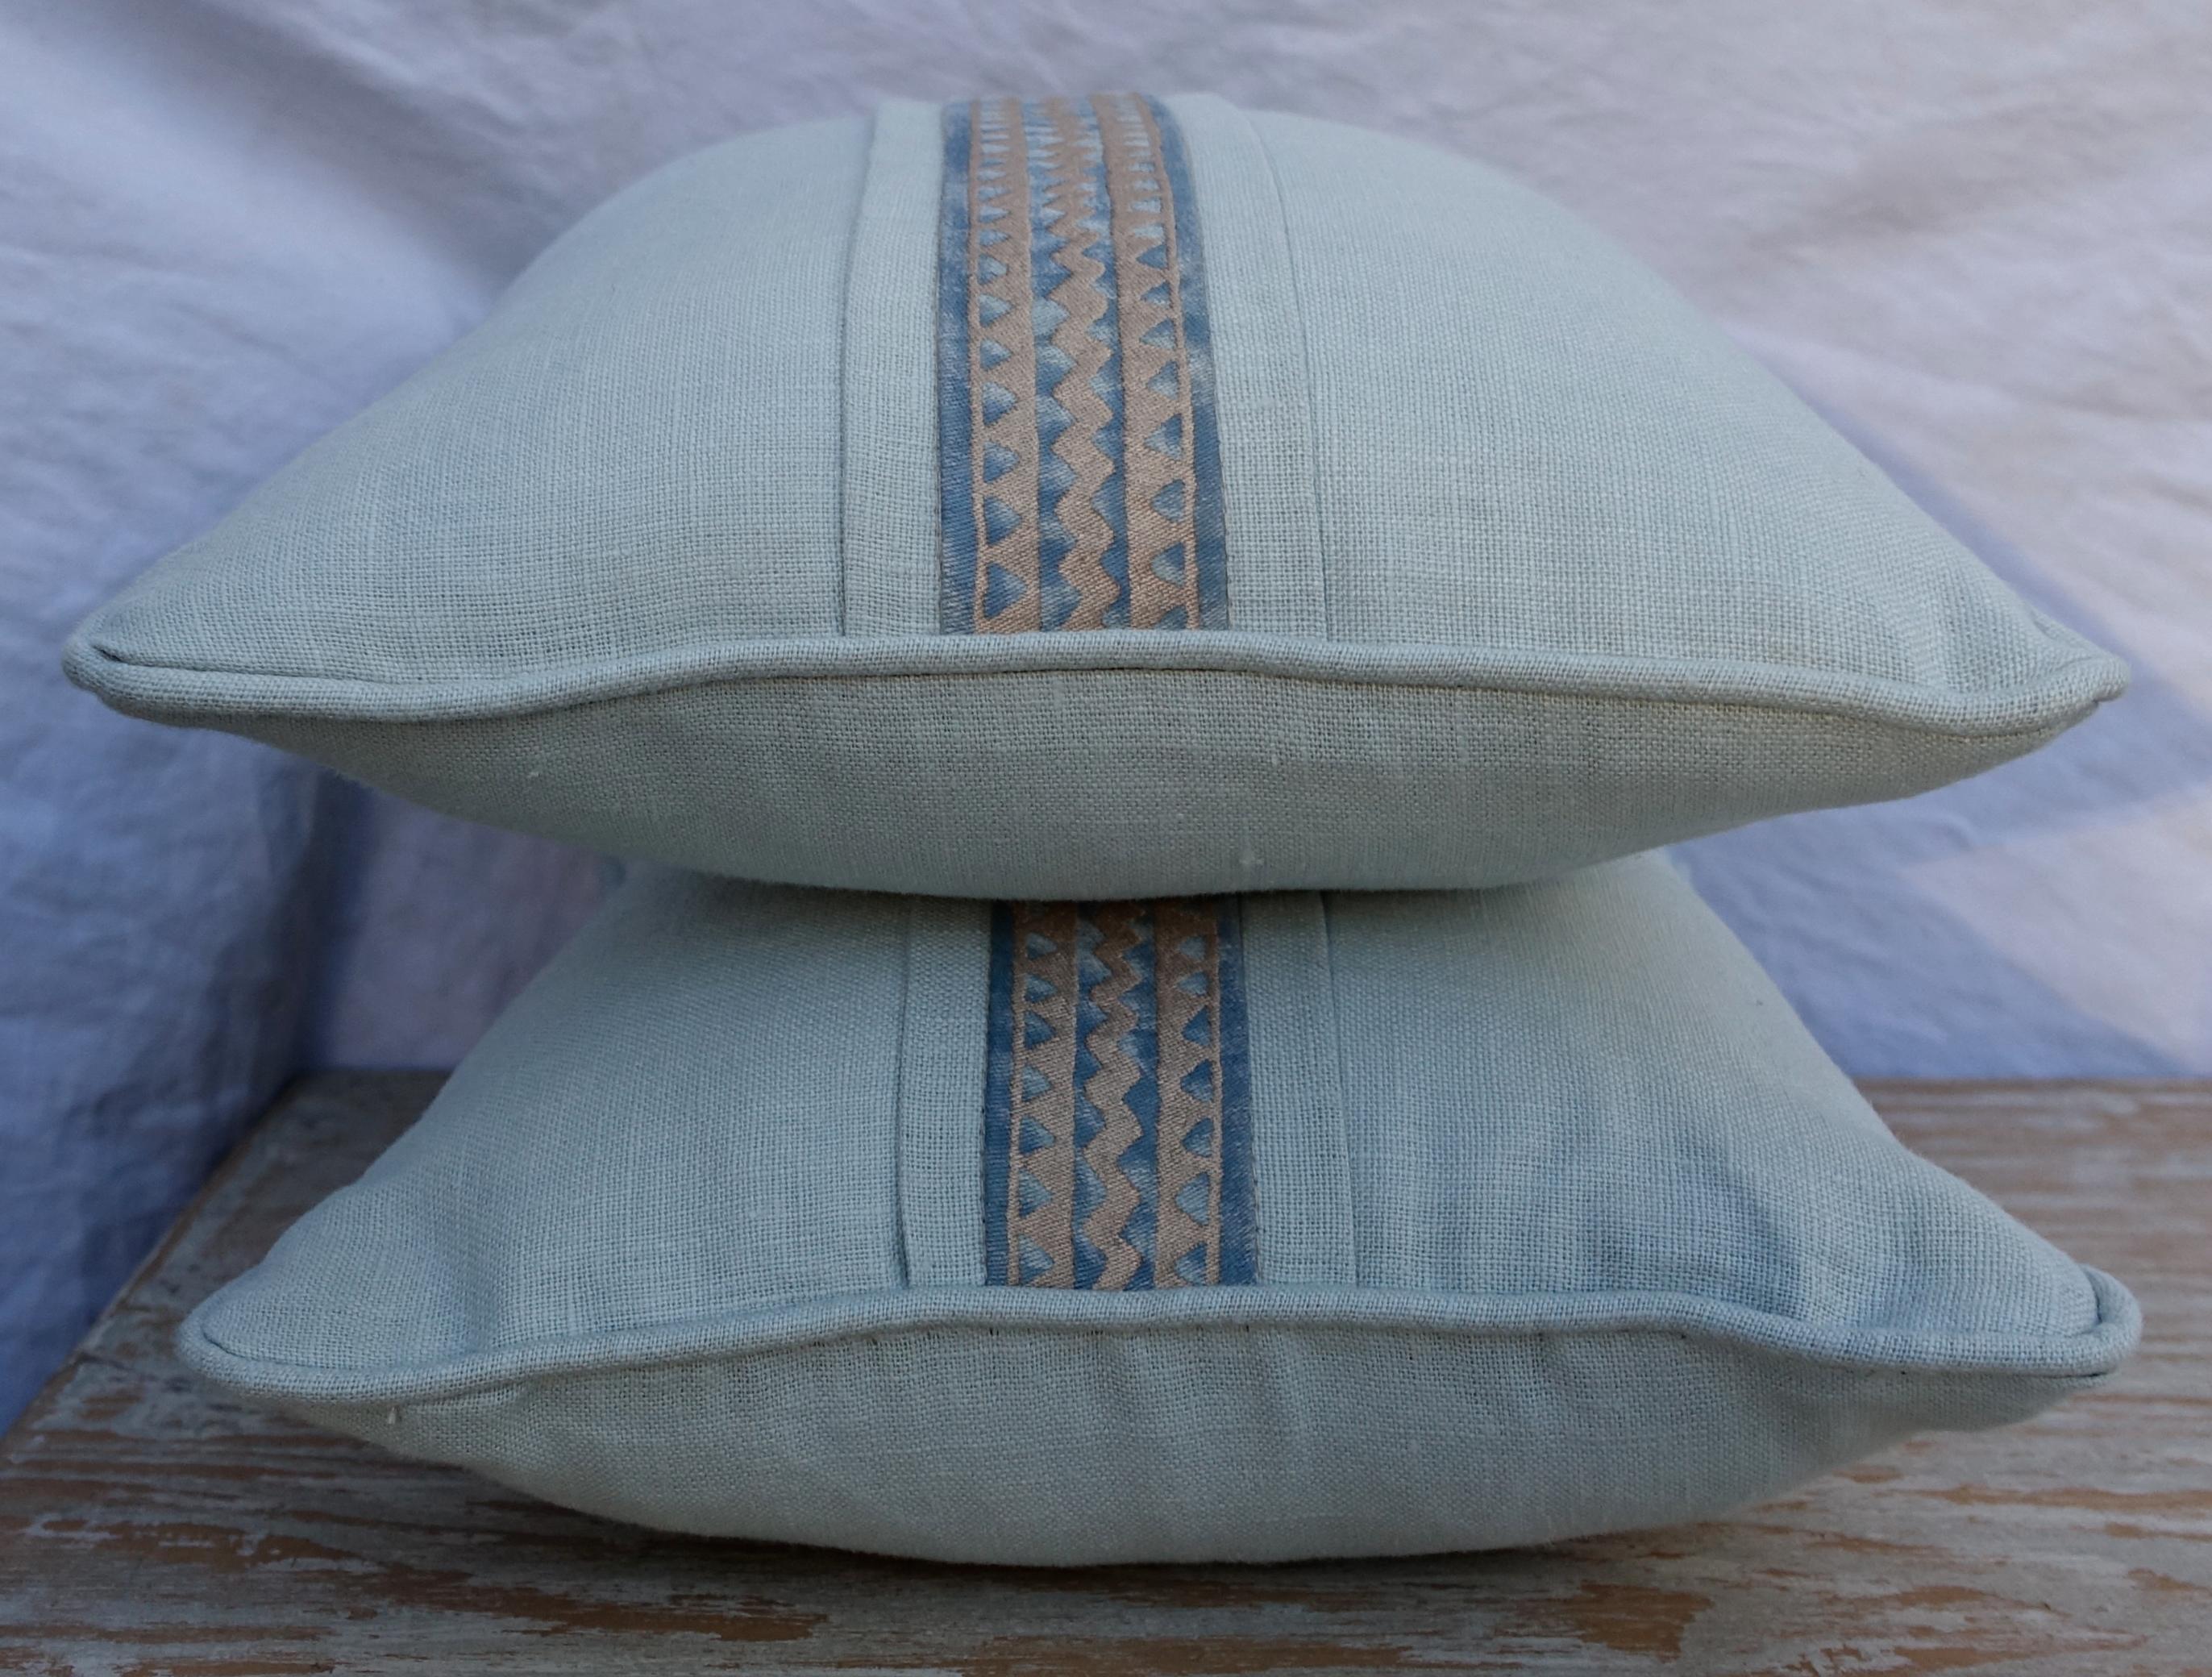 Pair of custom pillows made with vintage blue and silvery gold Fortuny border combined with faded blue linen. Self-cord detail. Down inserts, sewn closed.